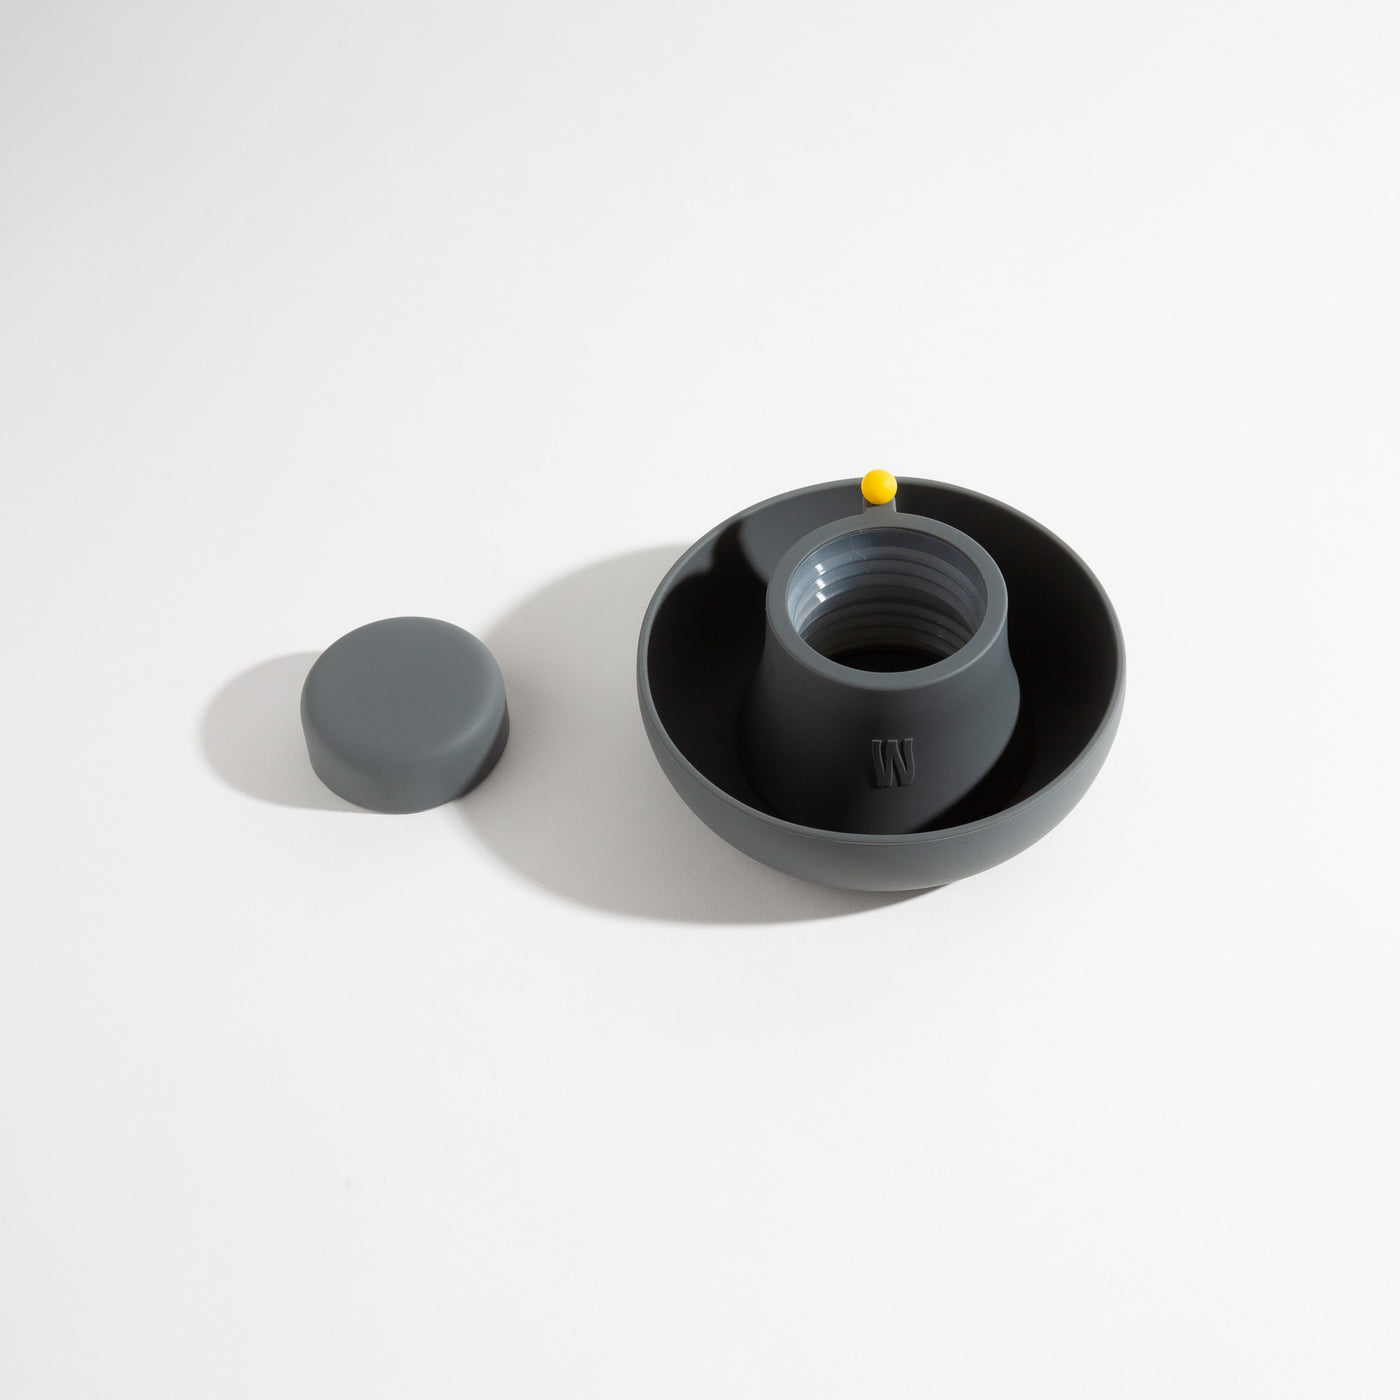 Smoke gray silicone bong cover for glass bong protection on a white background